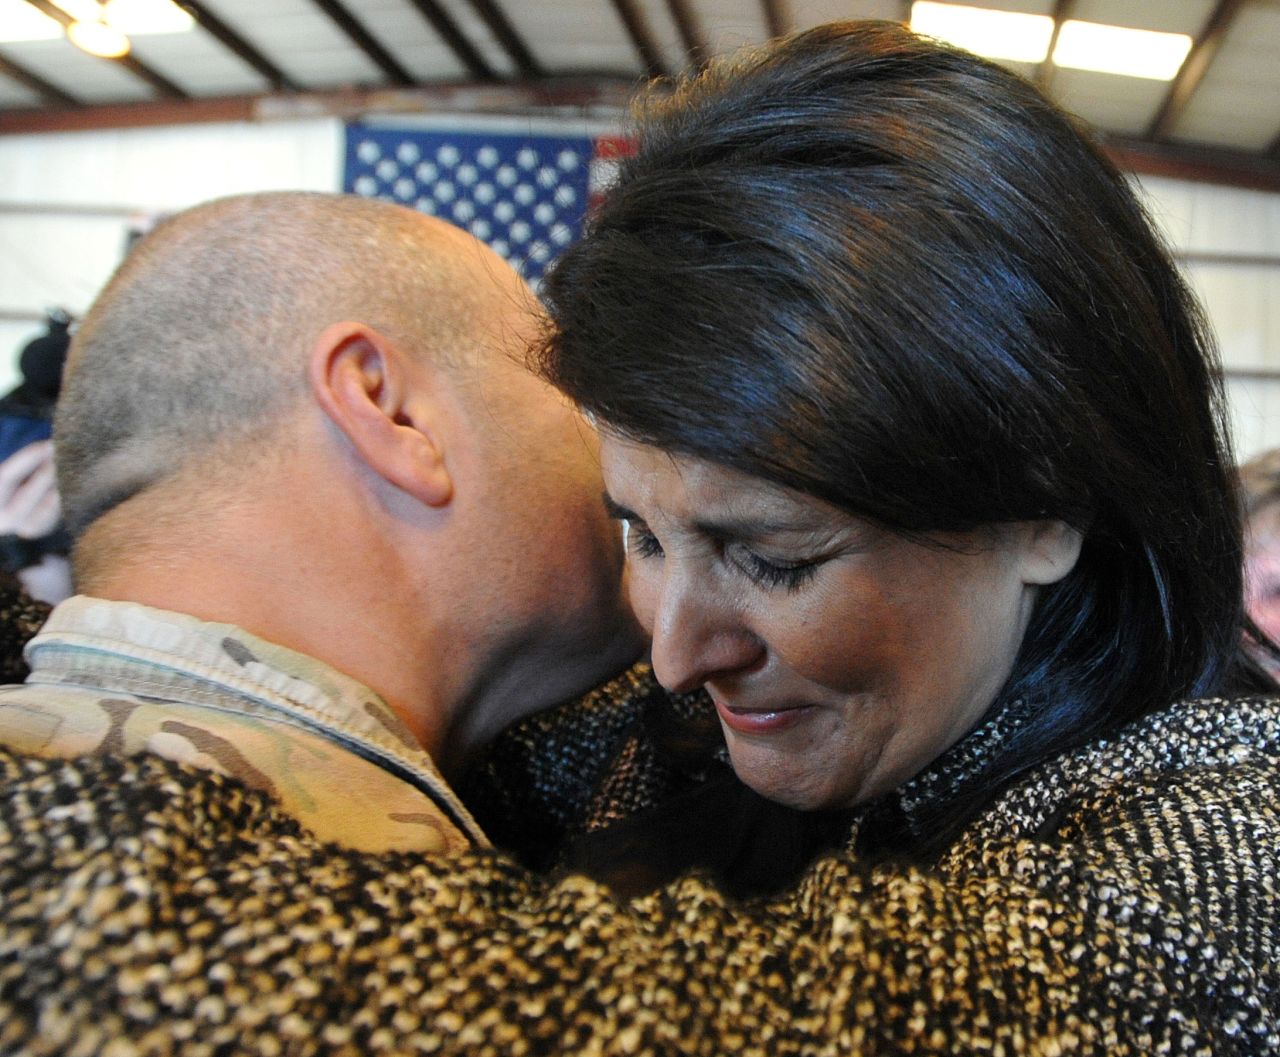 Haley hugs her husband after his Army National Guard unit returned in 2013. Michael Haley was deployed in Afghanistan for a year. He was part of an agricultural team that trained Afghan farmers how to turn their poppy crops into food crops.